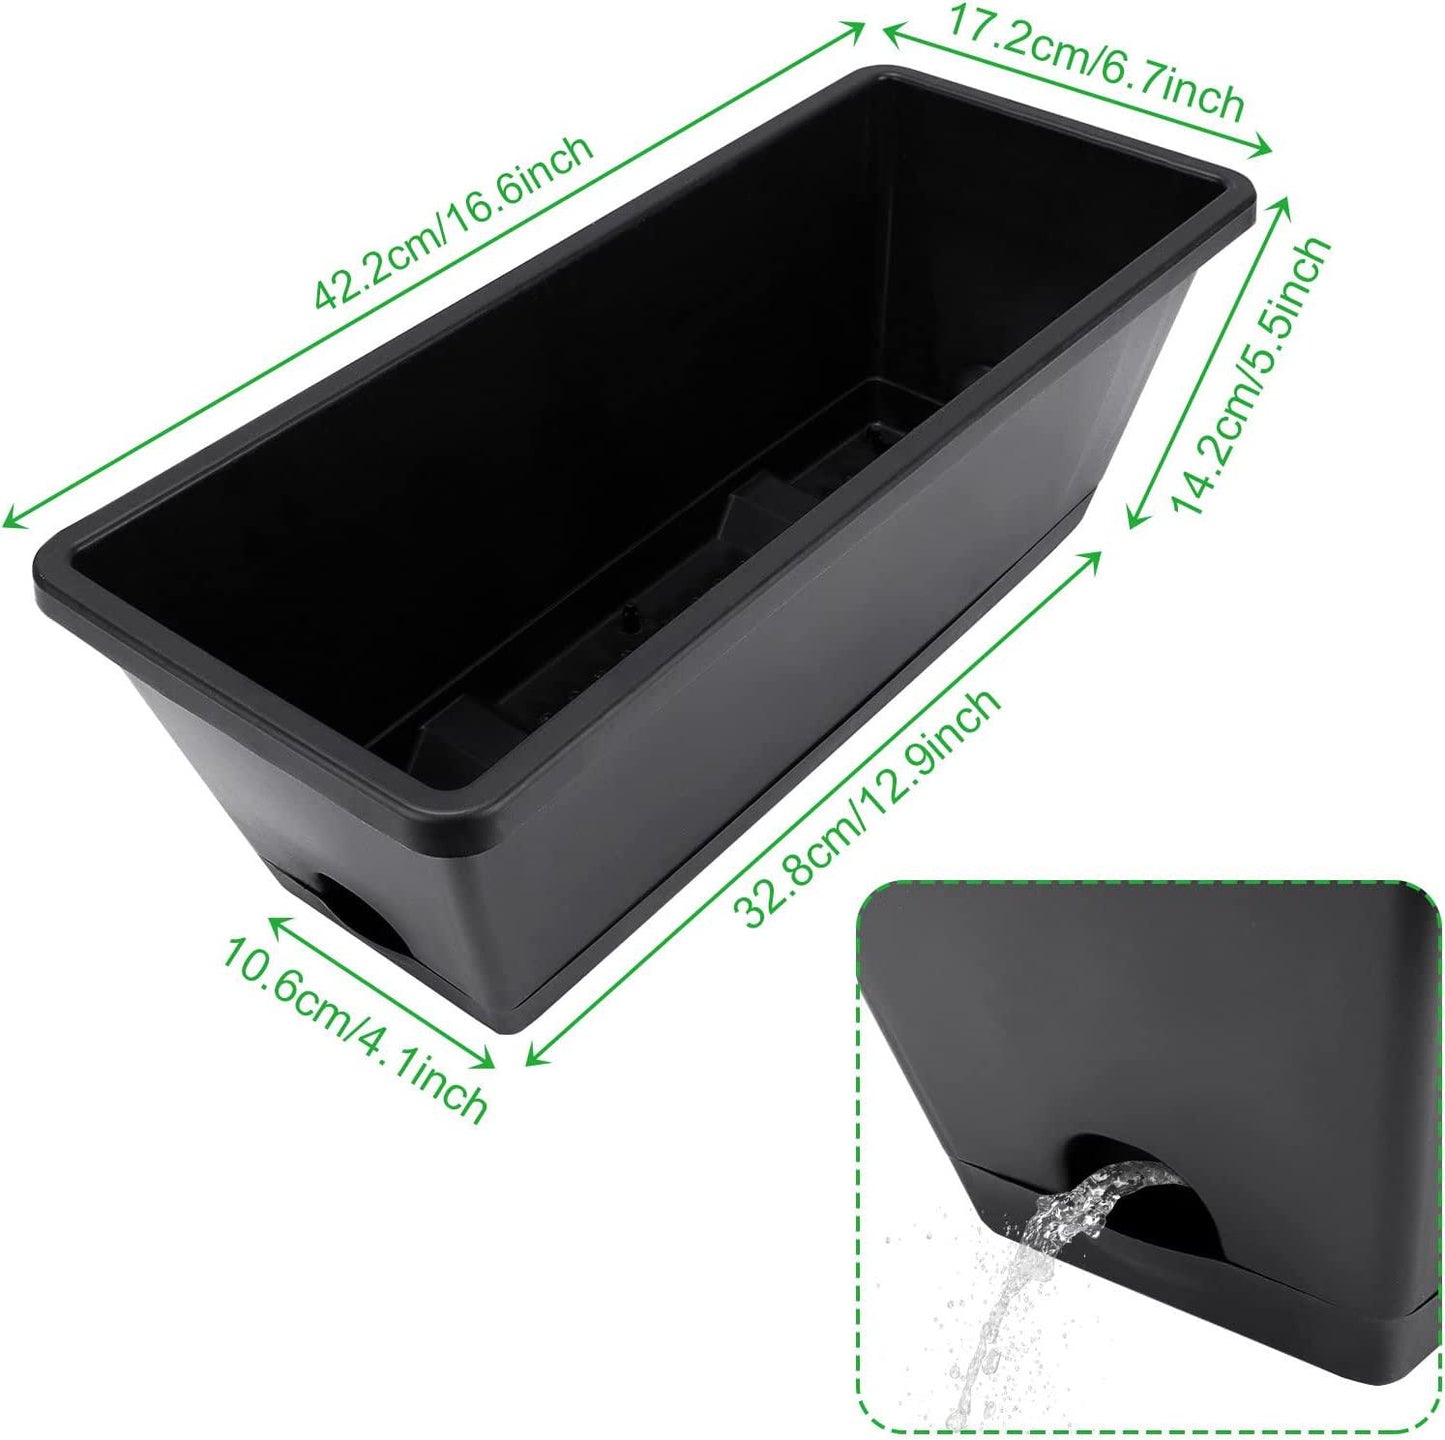 10Pcs Plastic Window Boxes Planters, Black Rectangle Flower Boxes, 16.6 x 6.7 x 5.5 inch Window Planter Boxes Outdoor with Drainage Holes and Trays